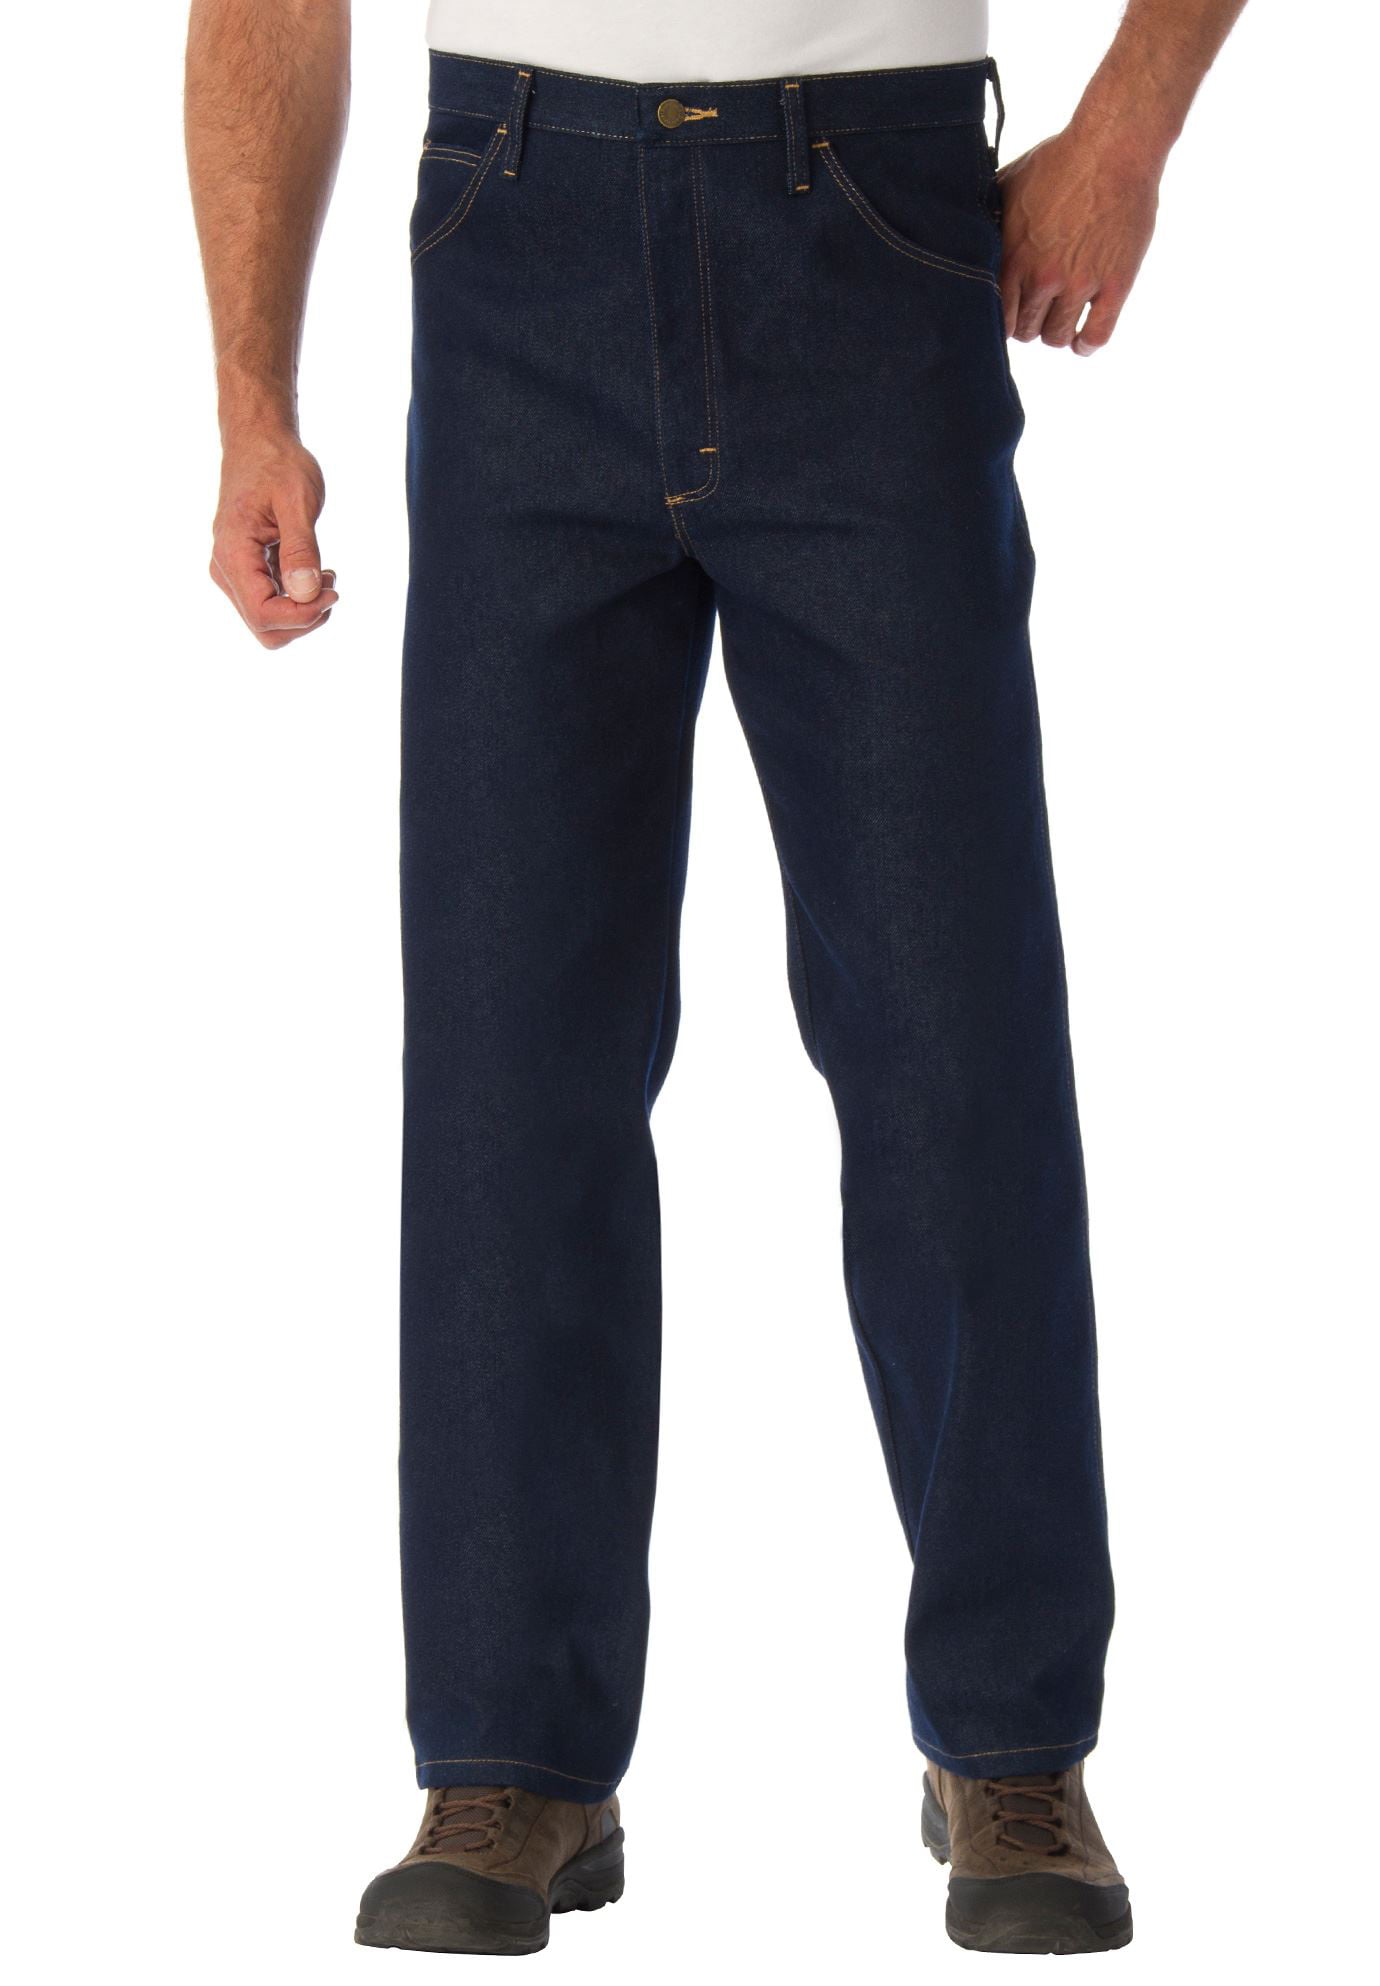 Wrangler - Wrangler Men's Big & Tall Relaxed Fit Stretch Jeans ...